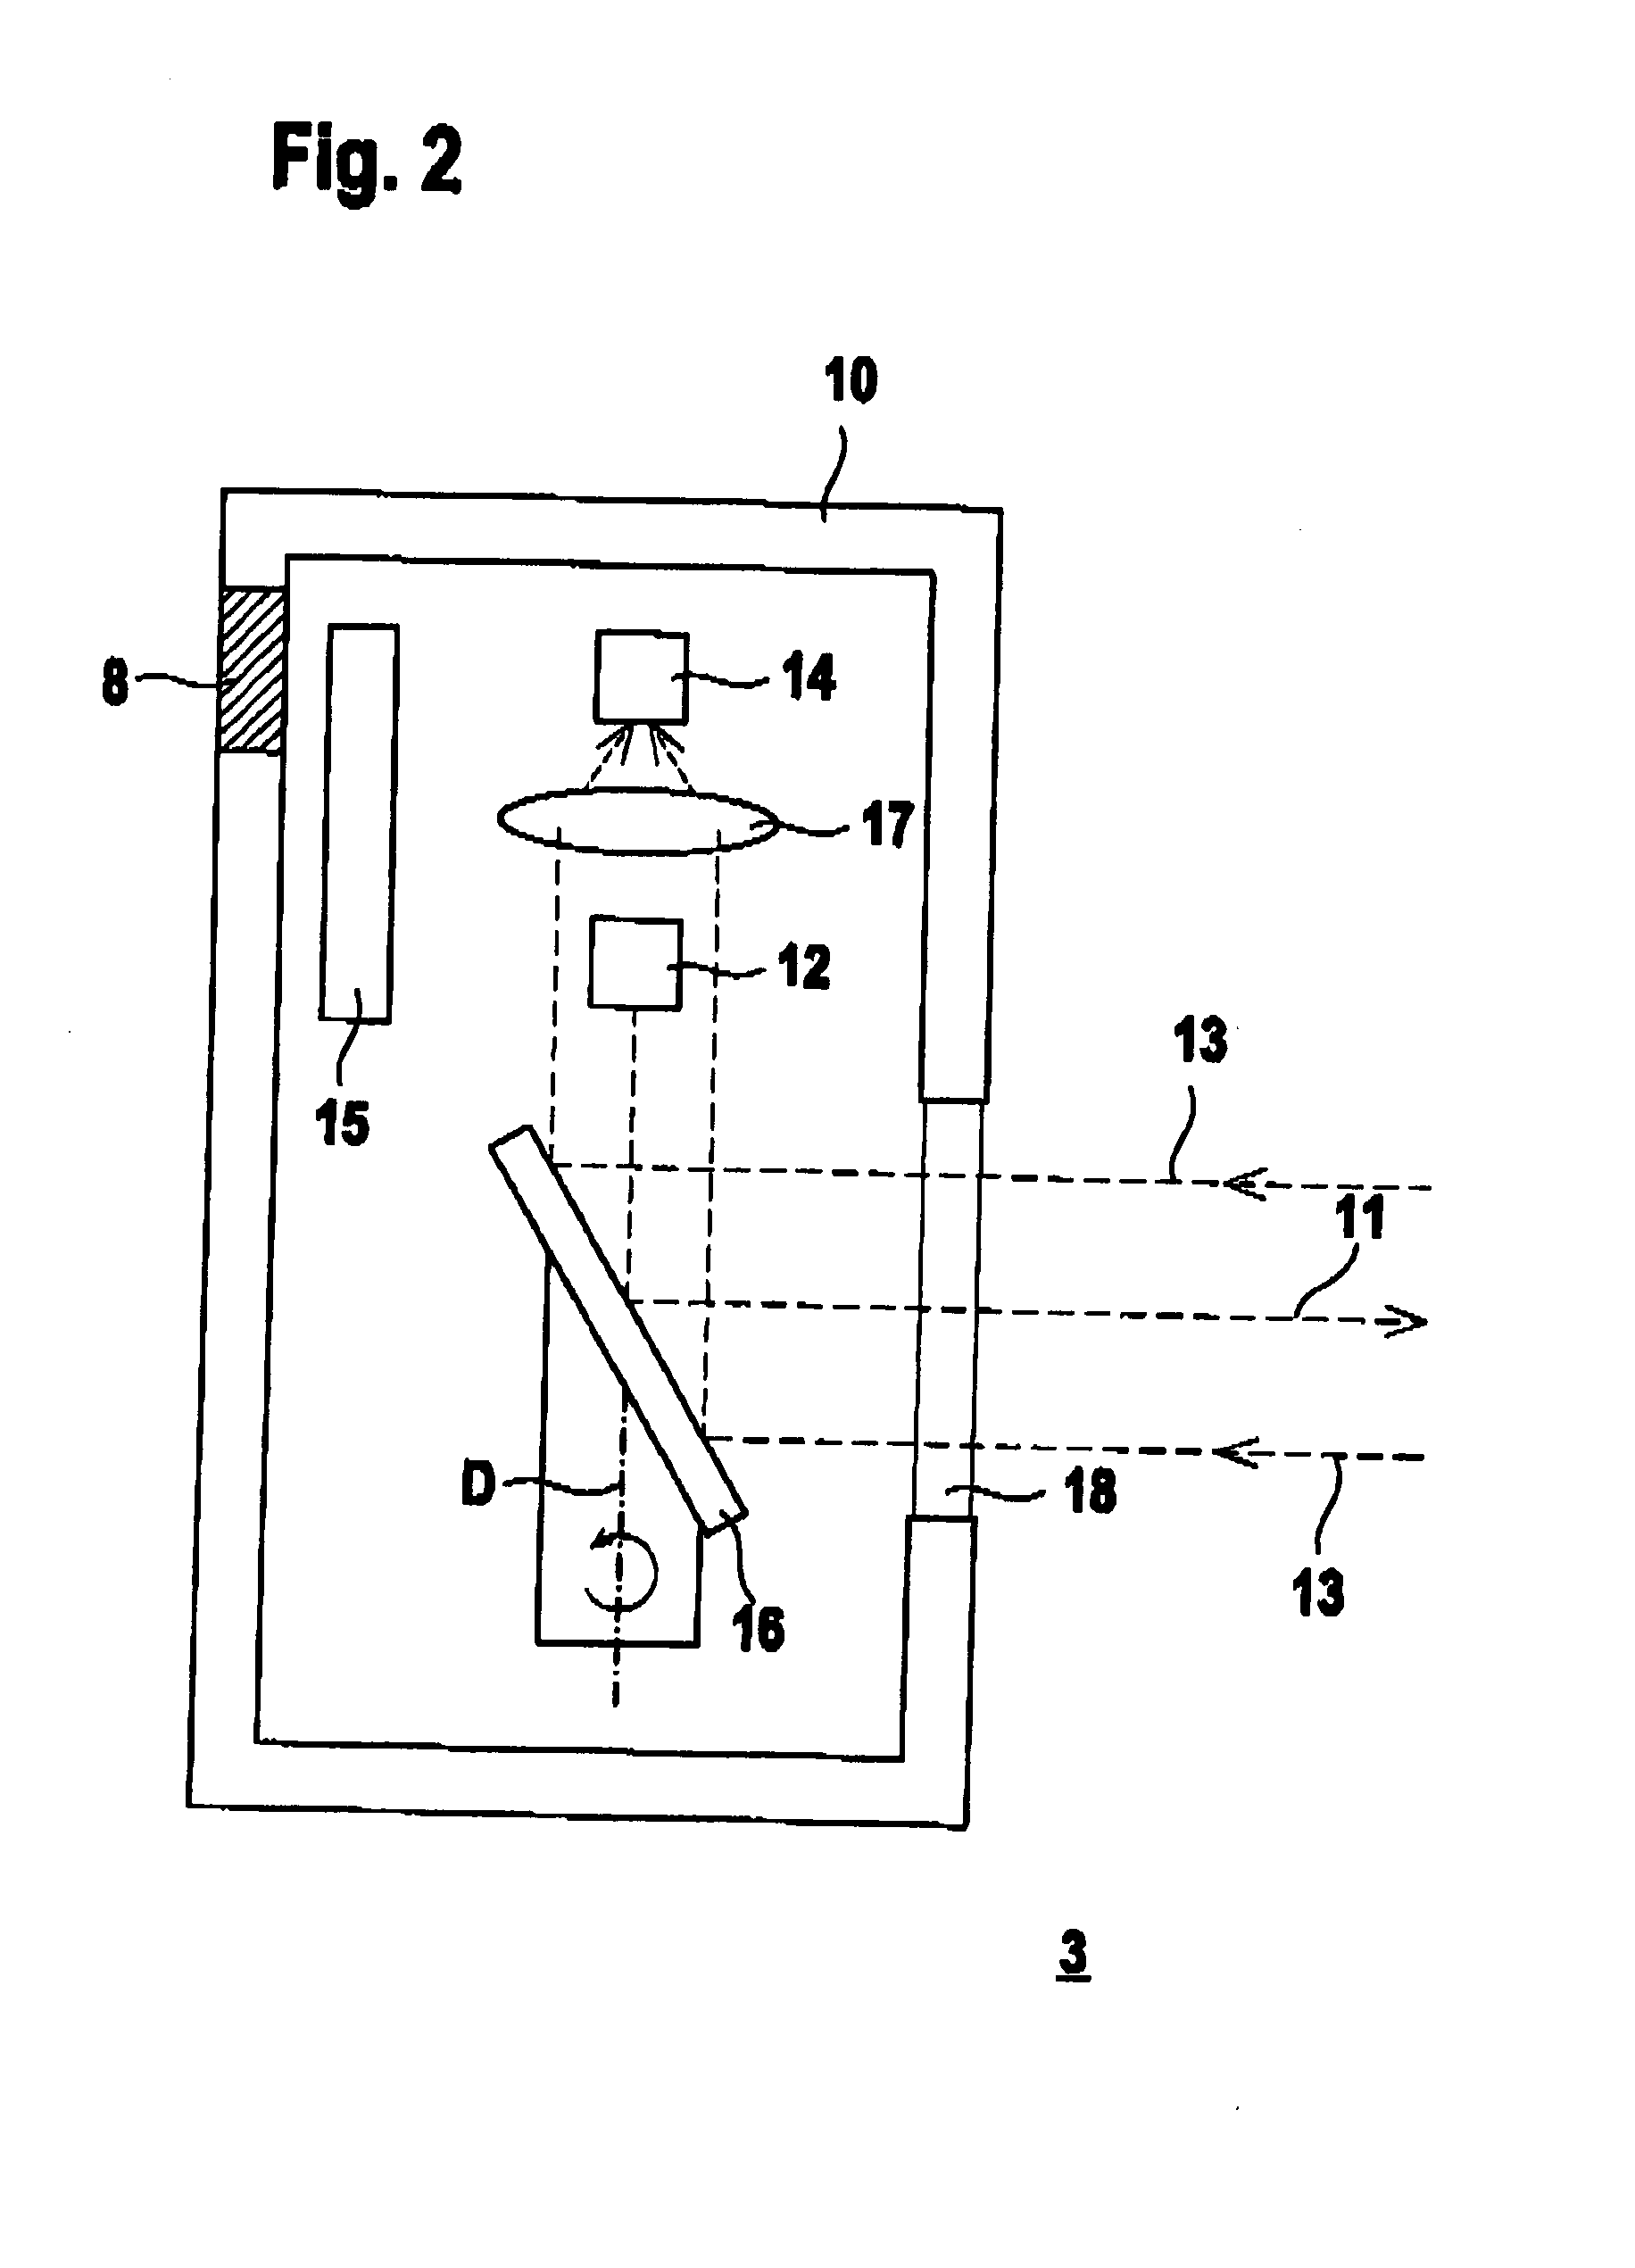 Device for detecting objects in a monitored area